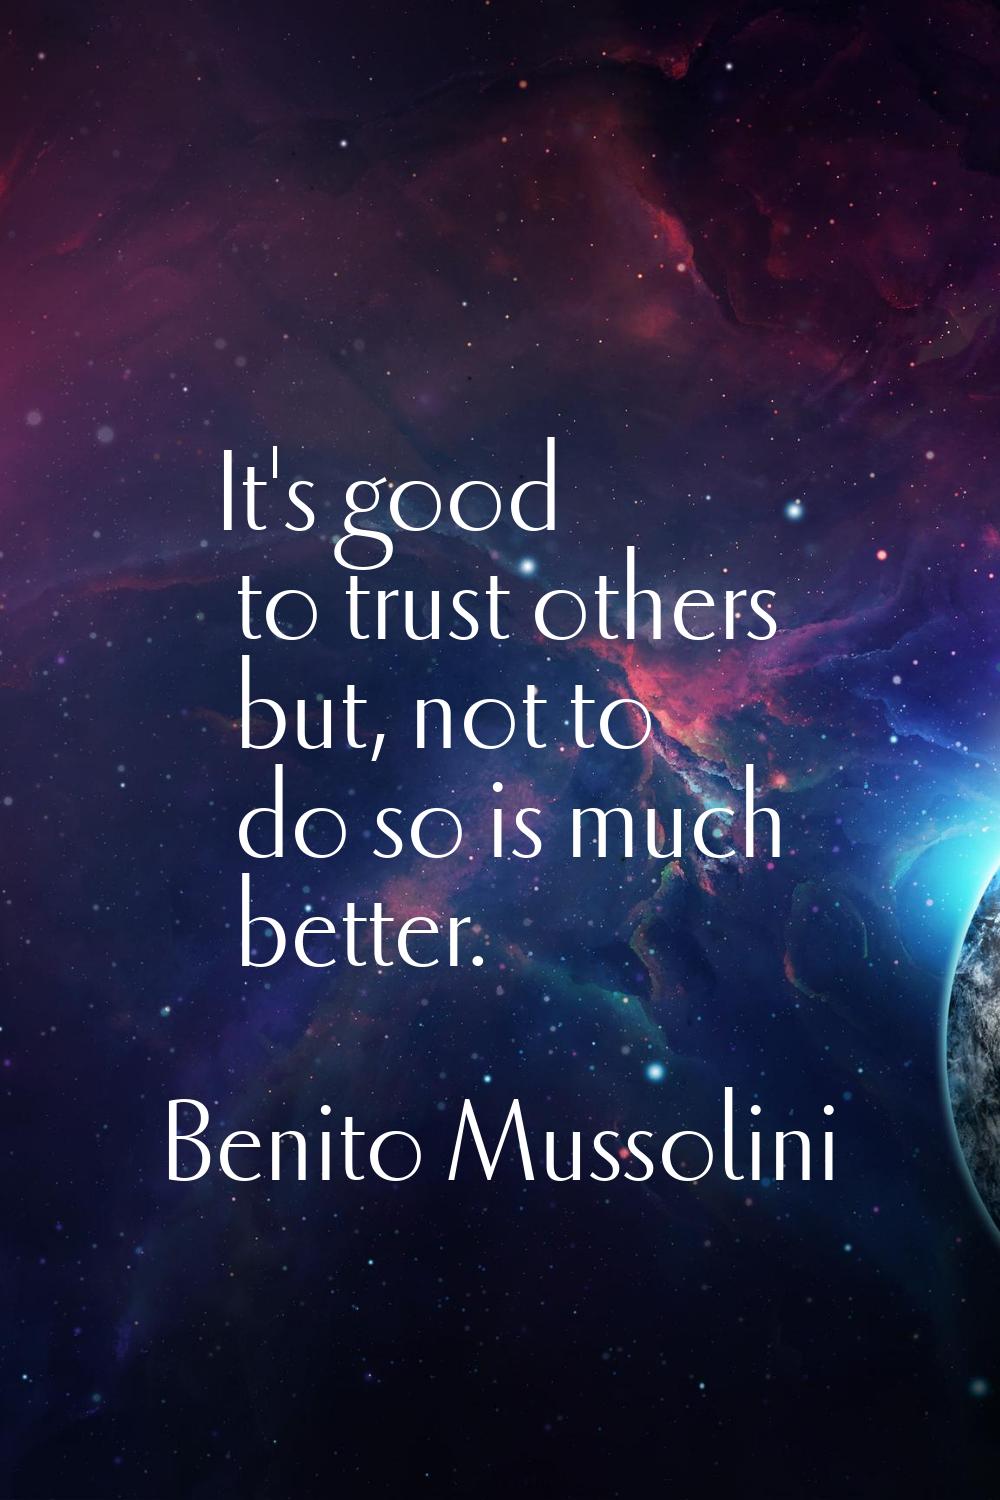 It's good to trust others but, not to do so is much better.